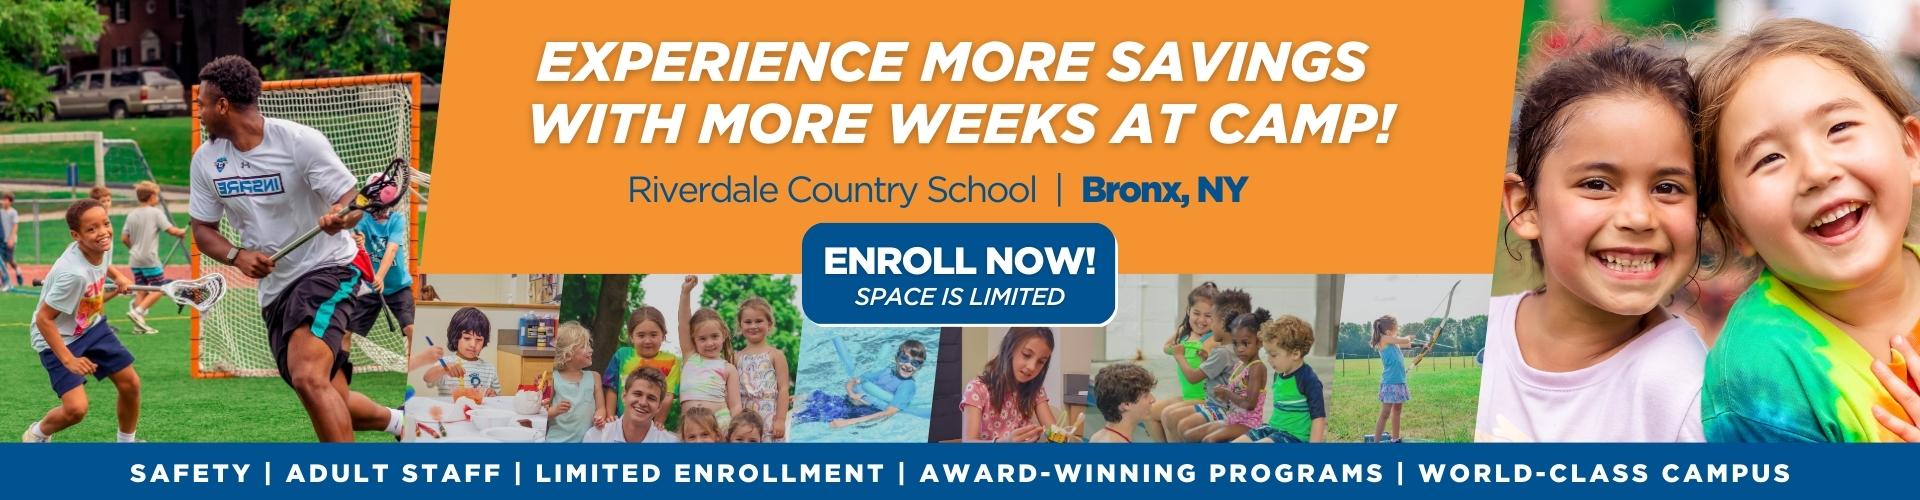 Experience more savings with more weeks at camp! Riverdale Country School Bronxs, NY